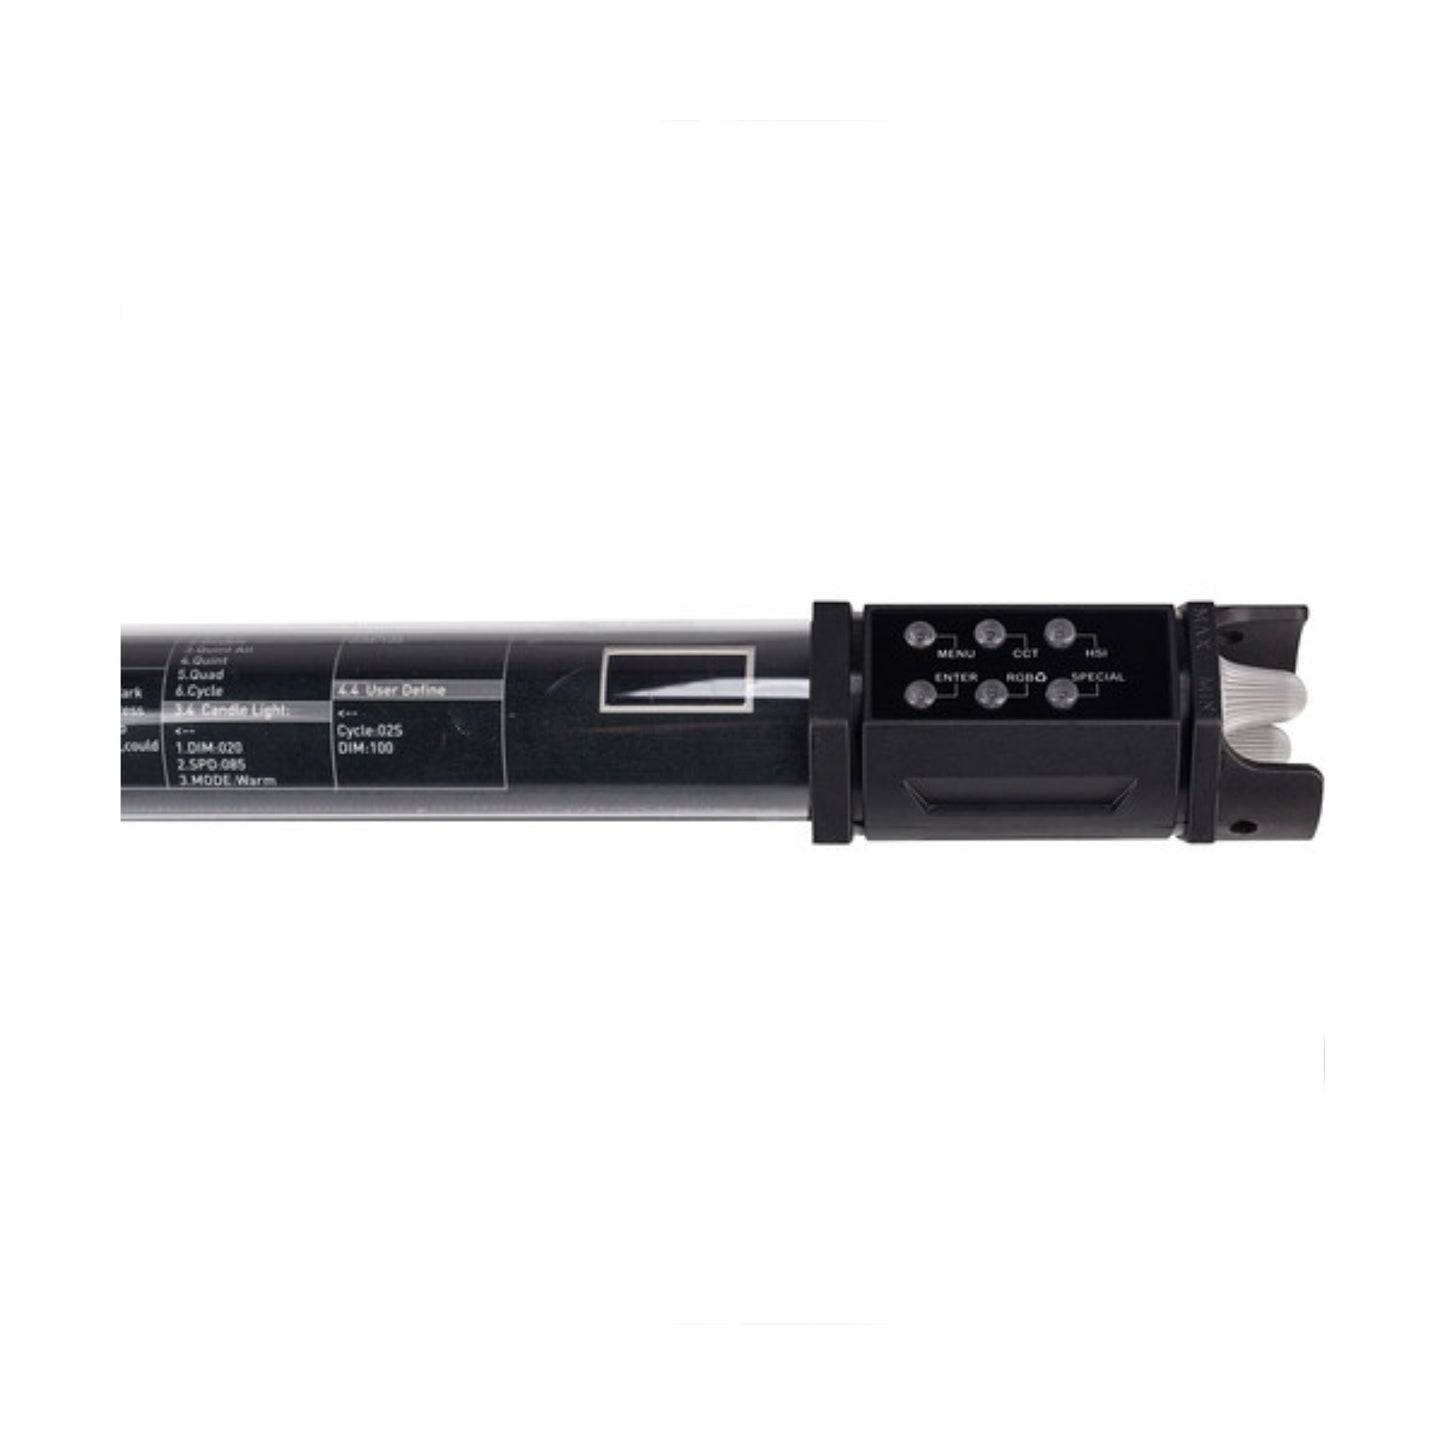 Hire Nanlite PavoTube 30C 4' RGBW LED Tube with Internal Battery 2 Light Kit At Topic Rentals